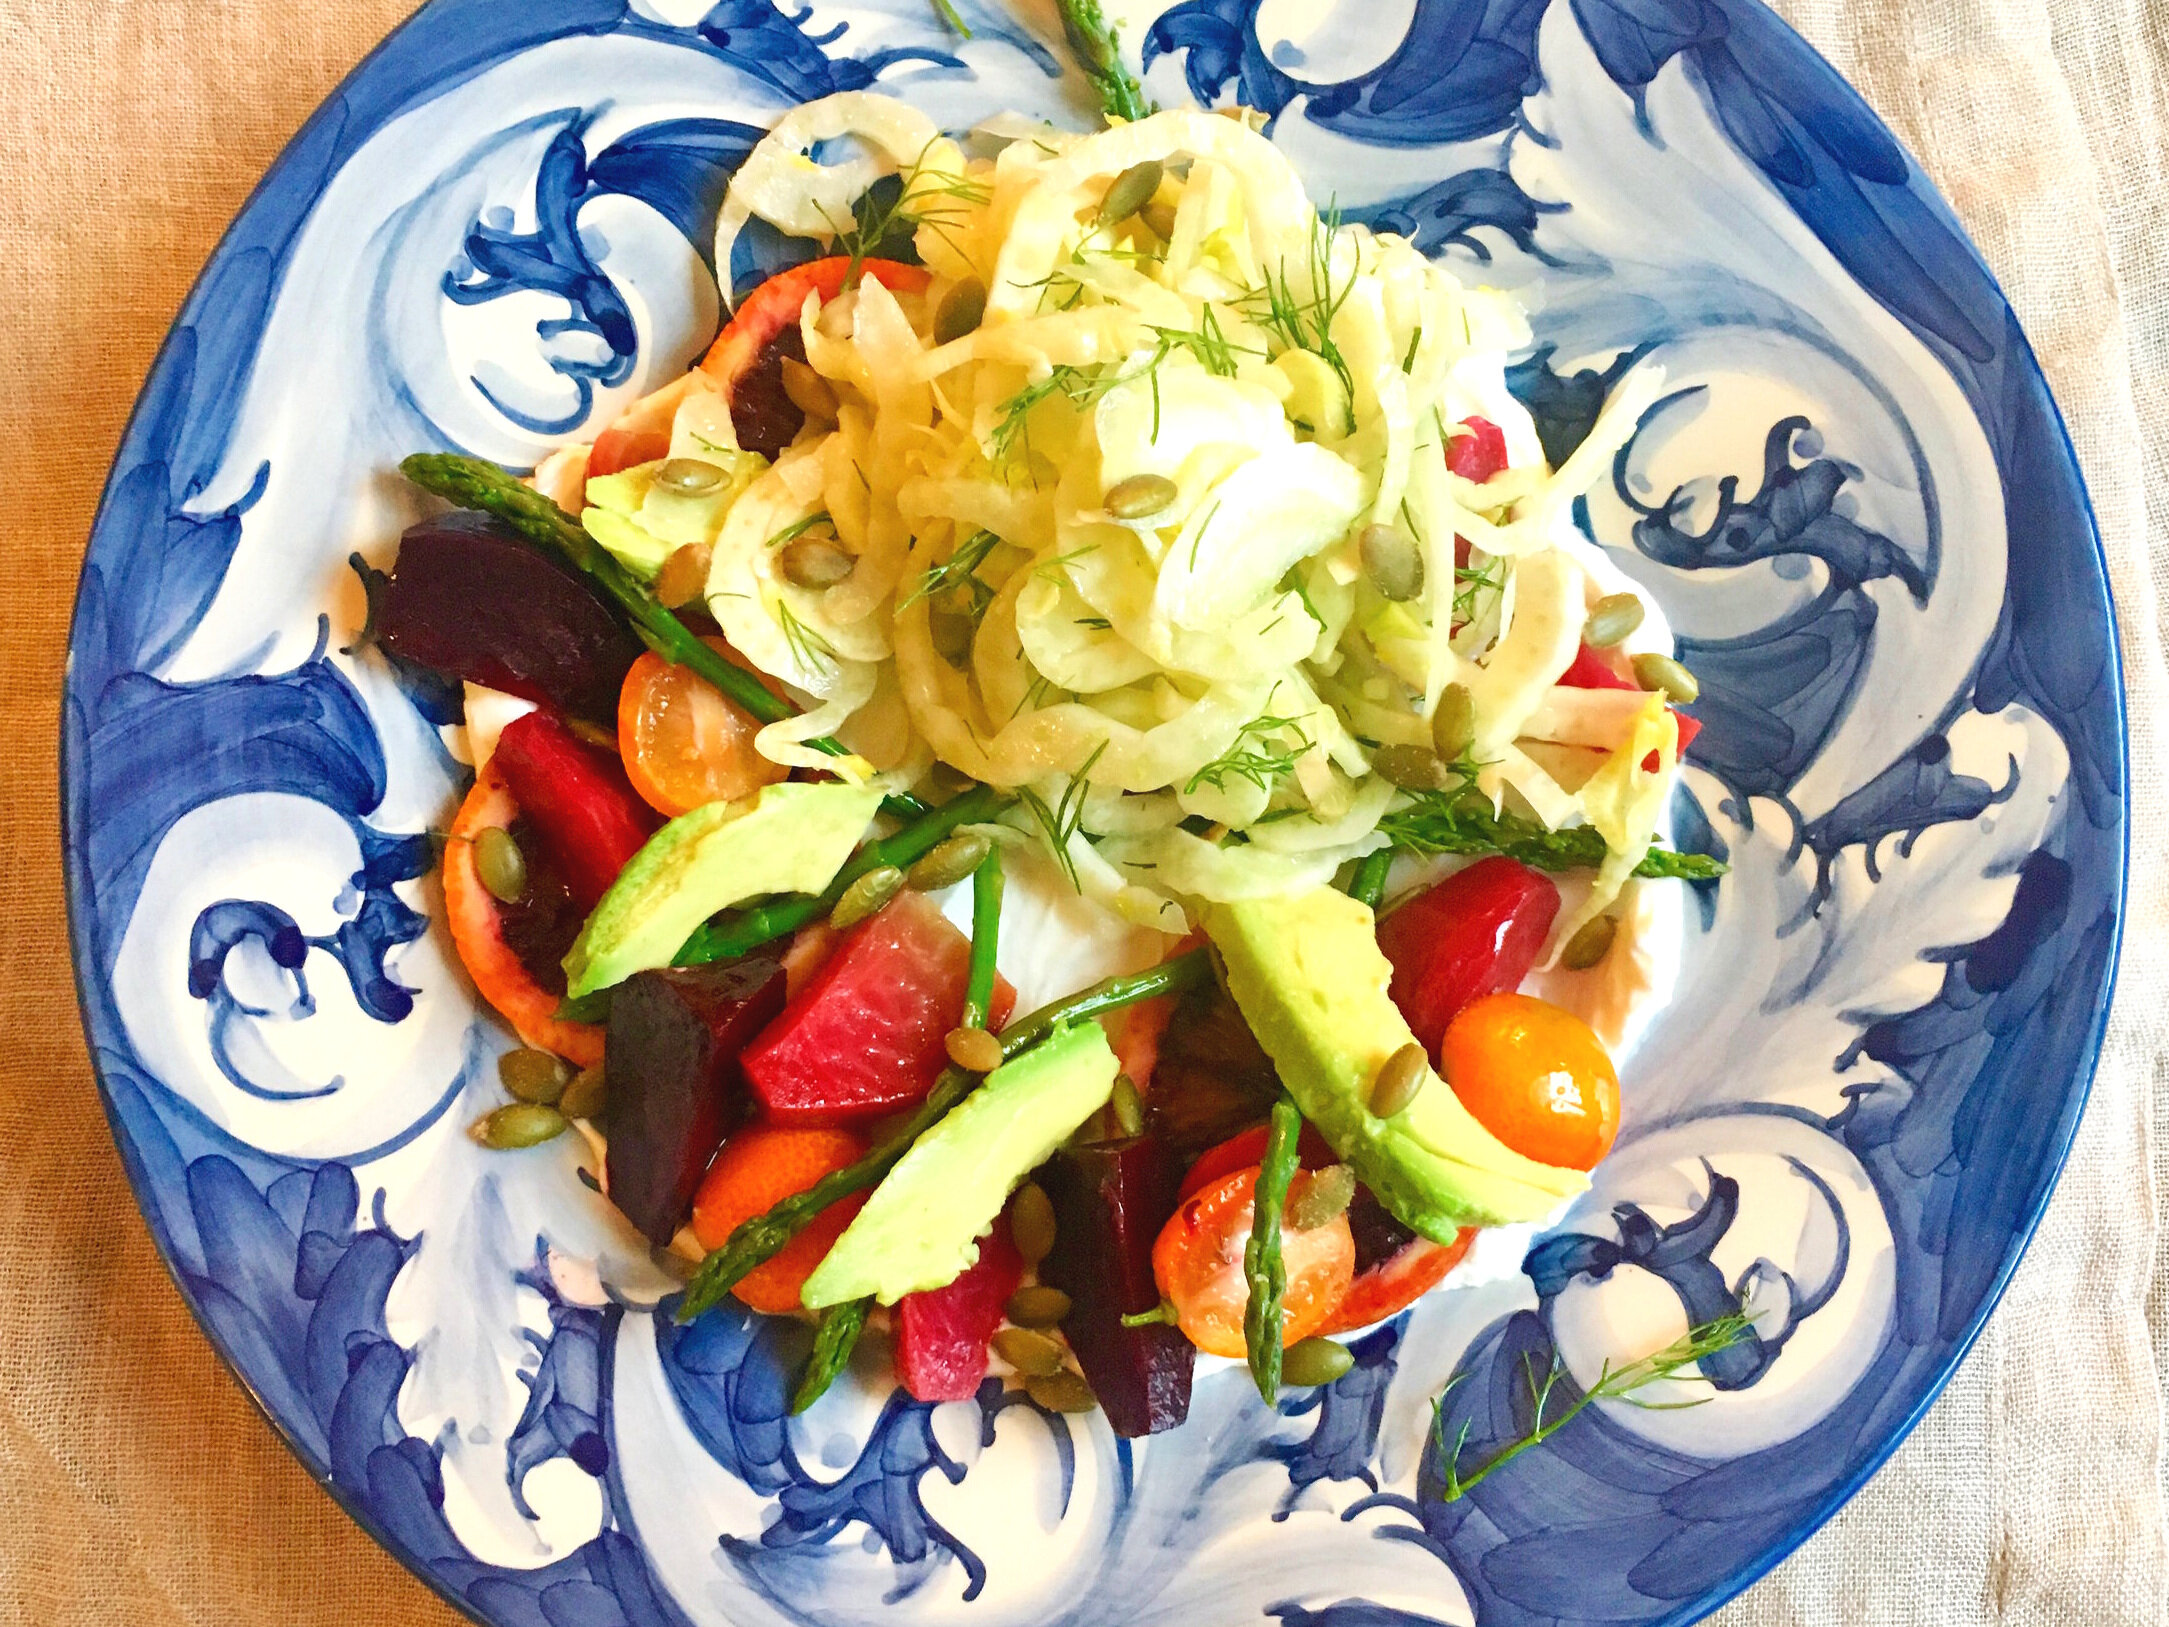 Shaved fennel, beet, and avocado salad